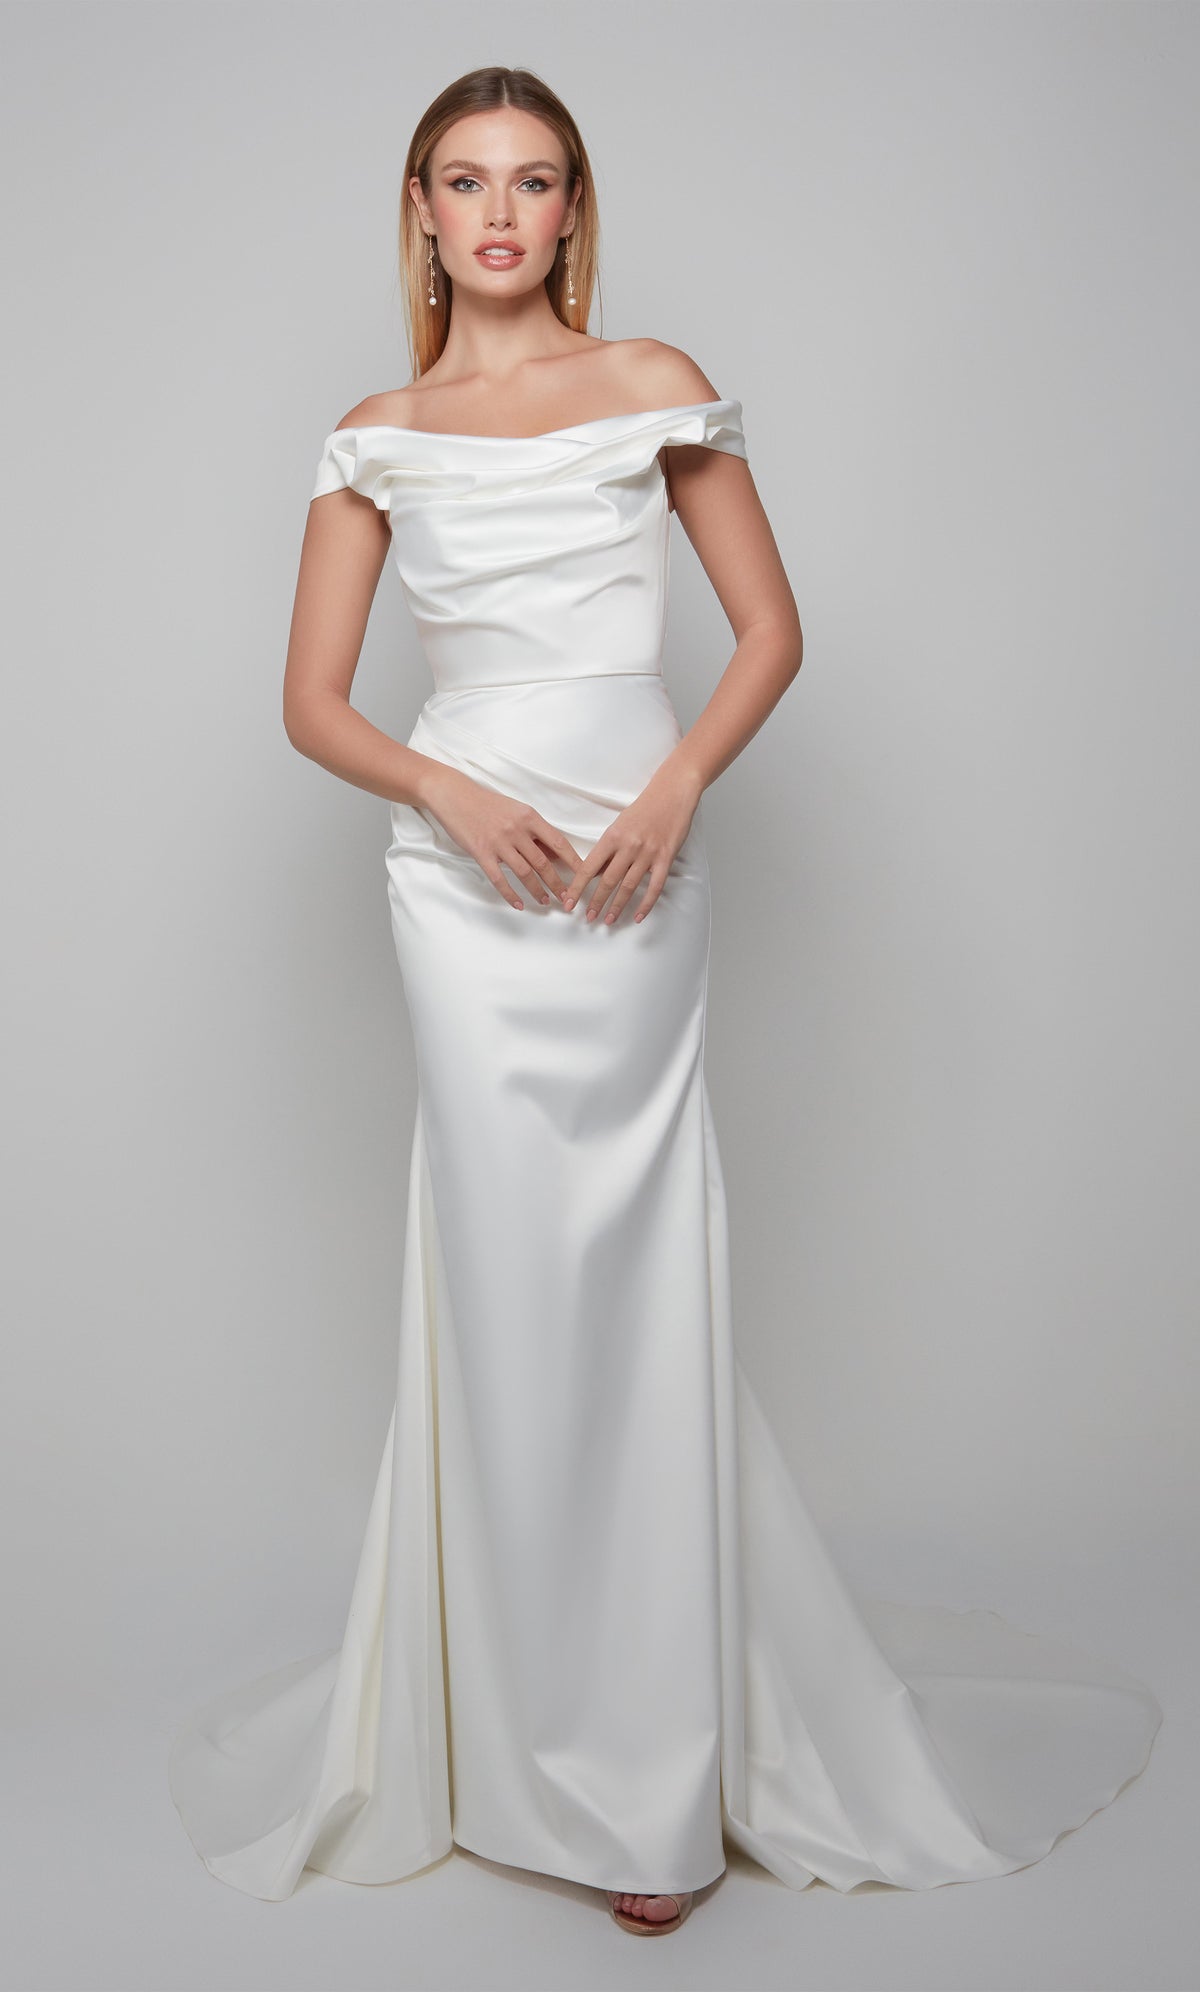 Simple wedding dress with an off the shoulder neckline in ivory.